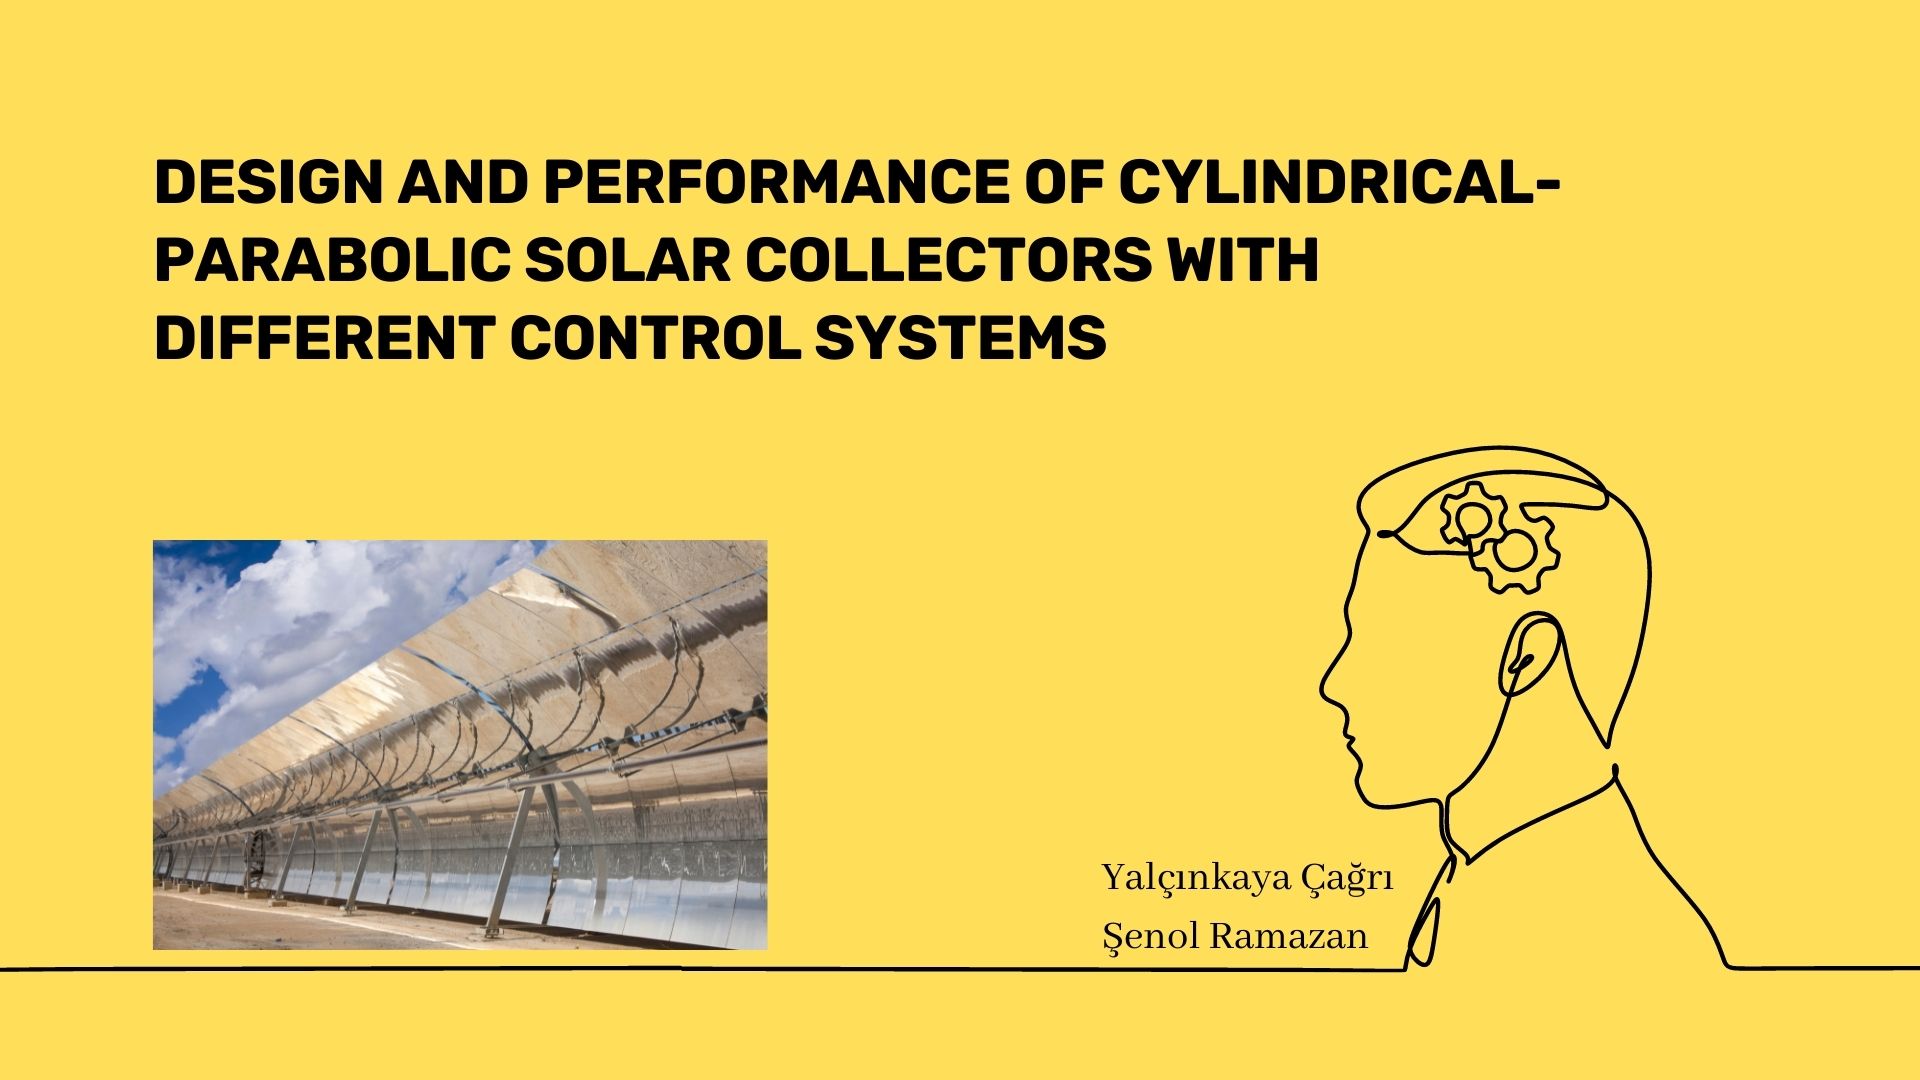 Design and performance of cylindrical-parabolic solar collectors with different control systems